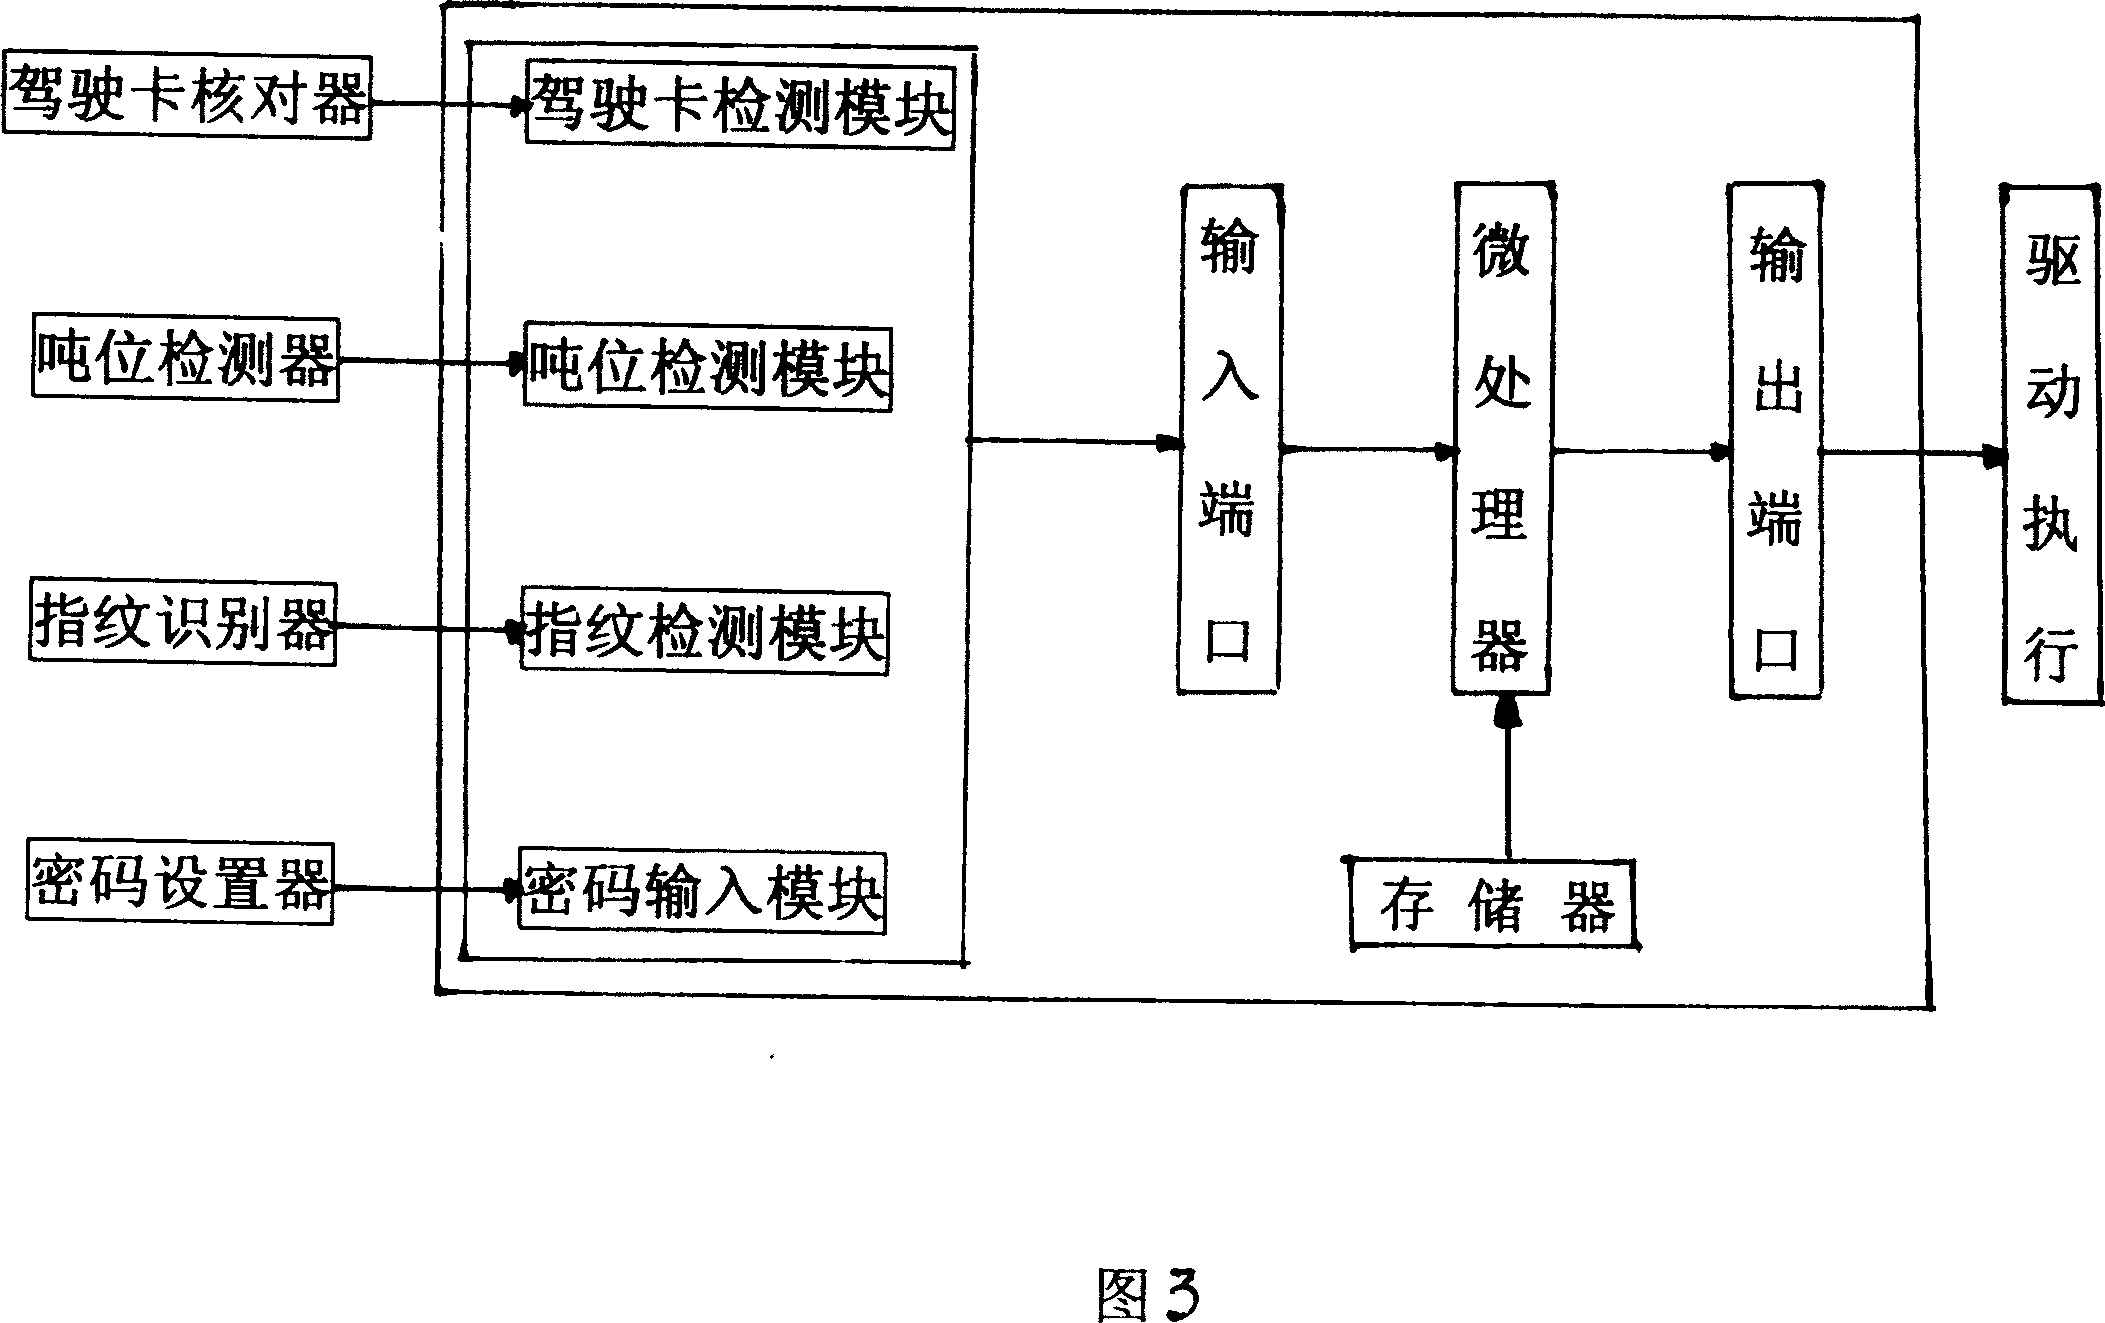 Safety checking management device for motor vehicles